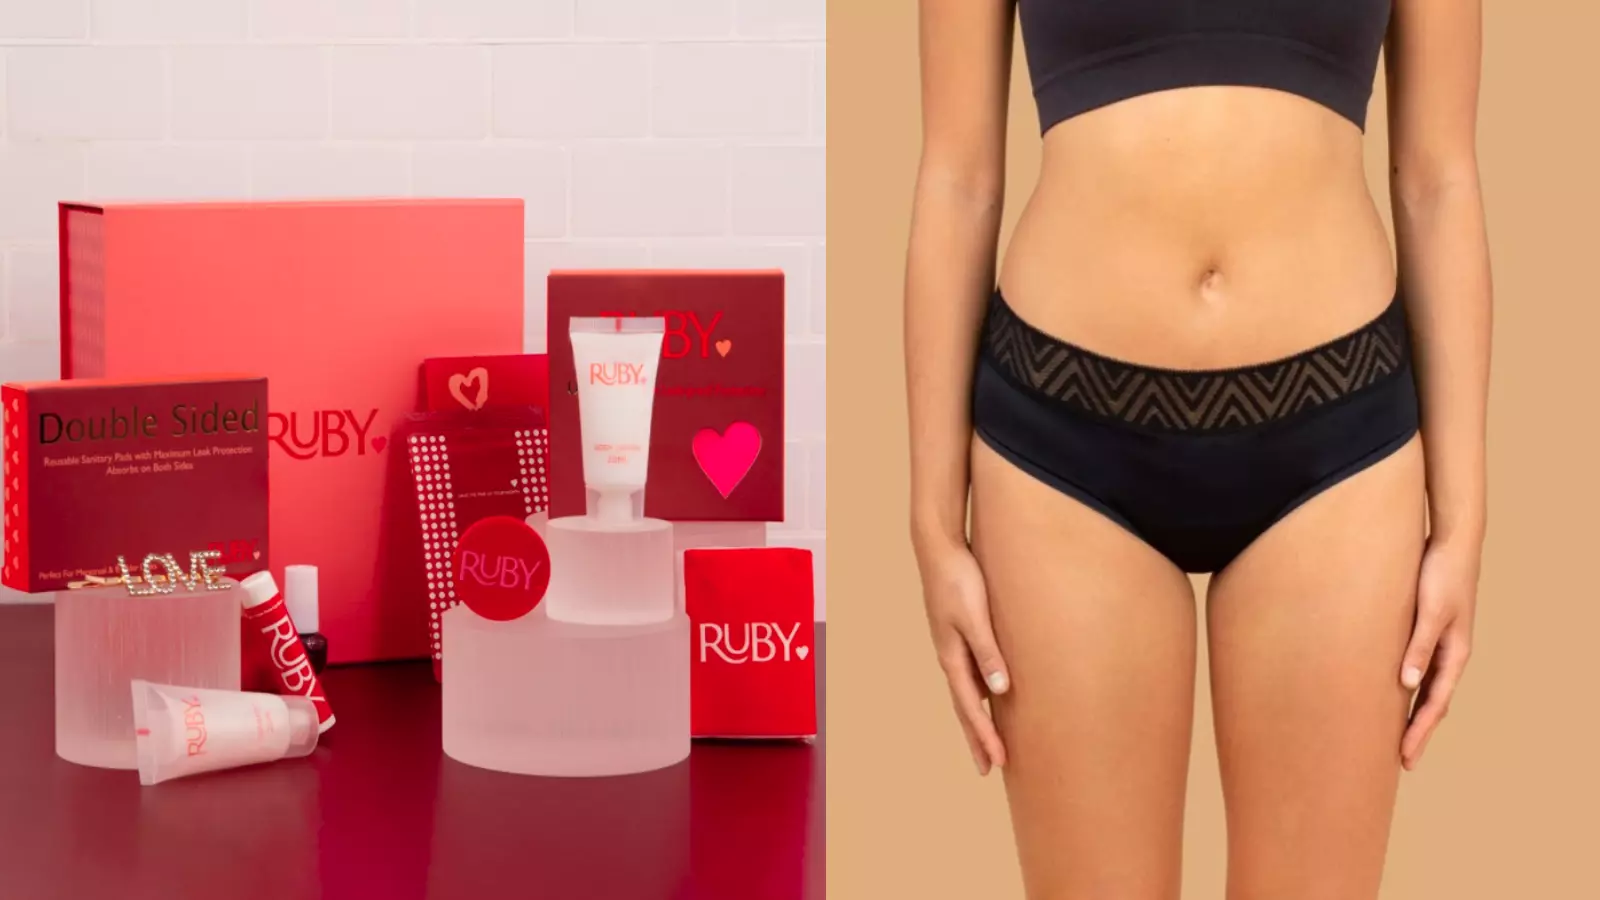 Ruby Love and Thinx are both big names in the menstrual health movement.